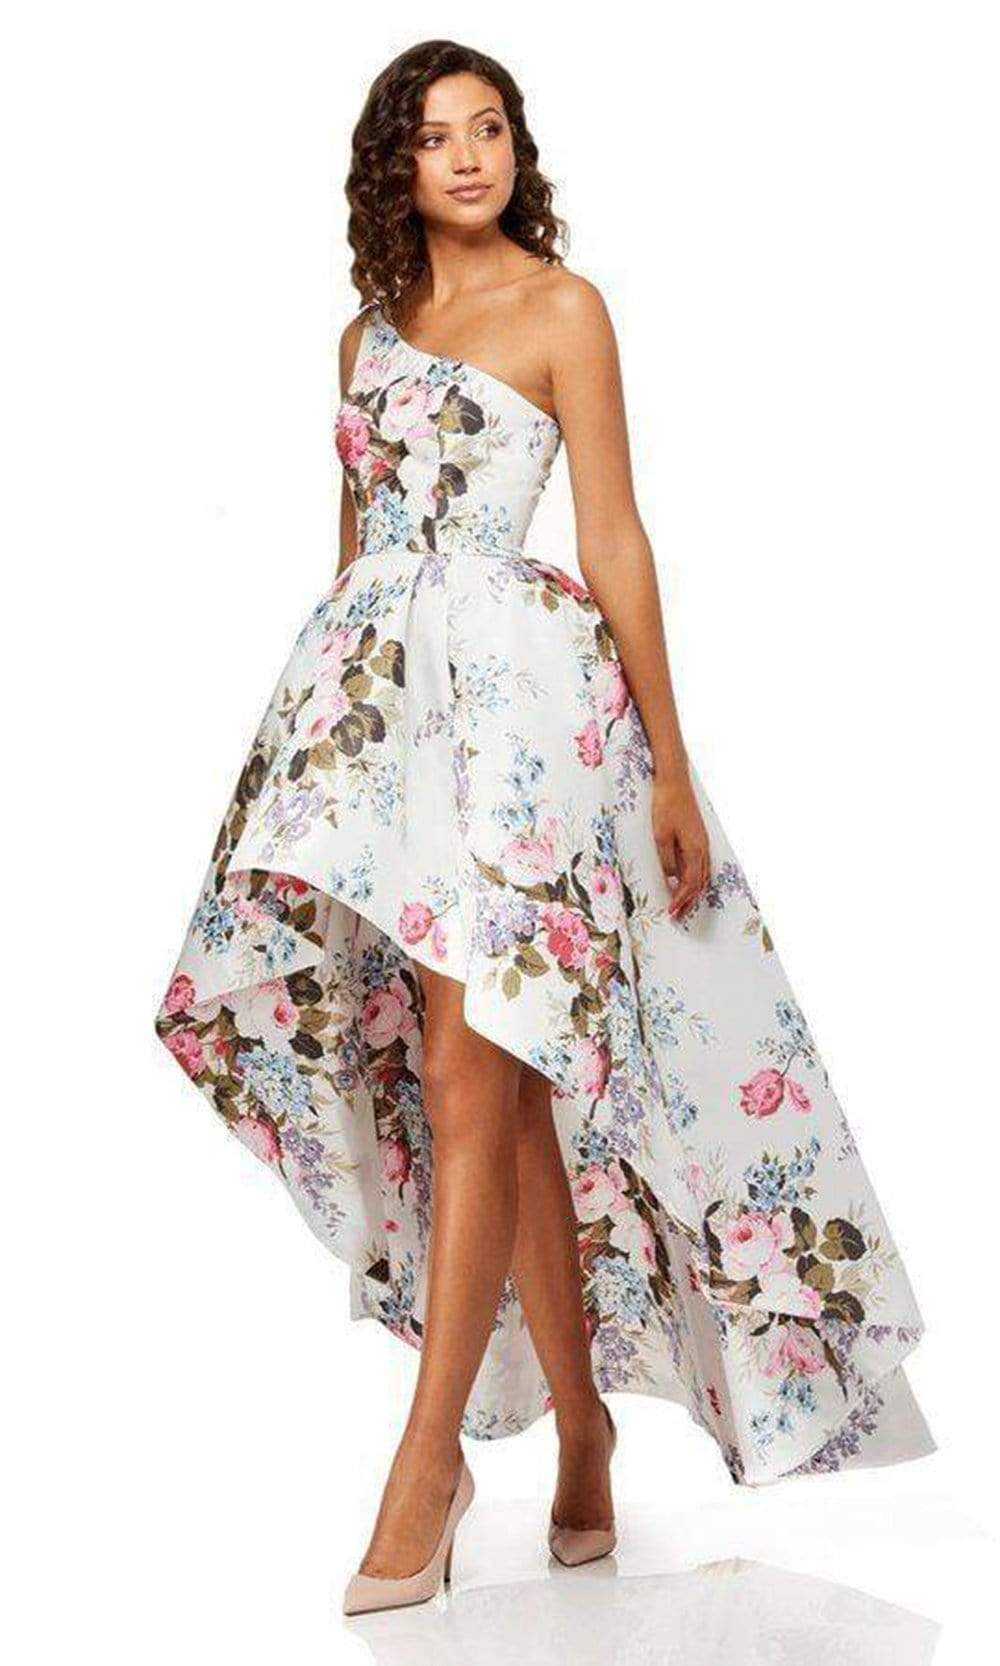 Sherri Hill, Sherri Hill - Floral Single Shoulder A-Line High Low Dress 52489 - 1 pc Ivory Print In Size 8 Available